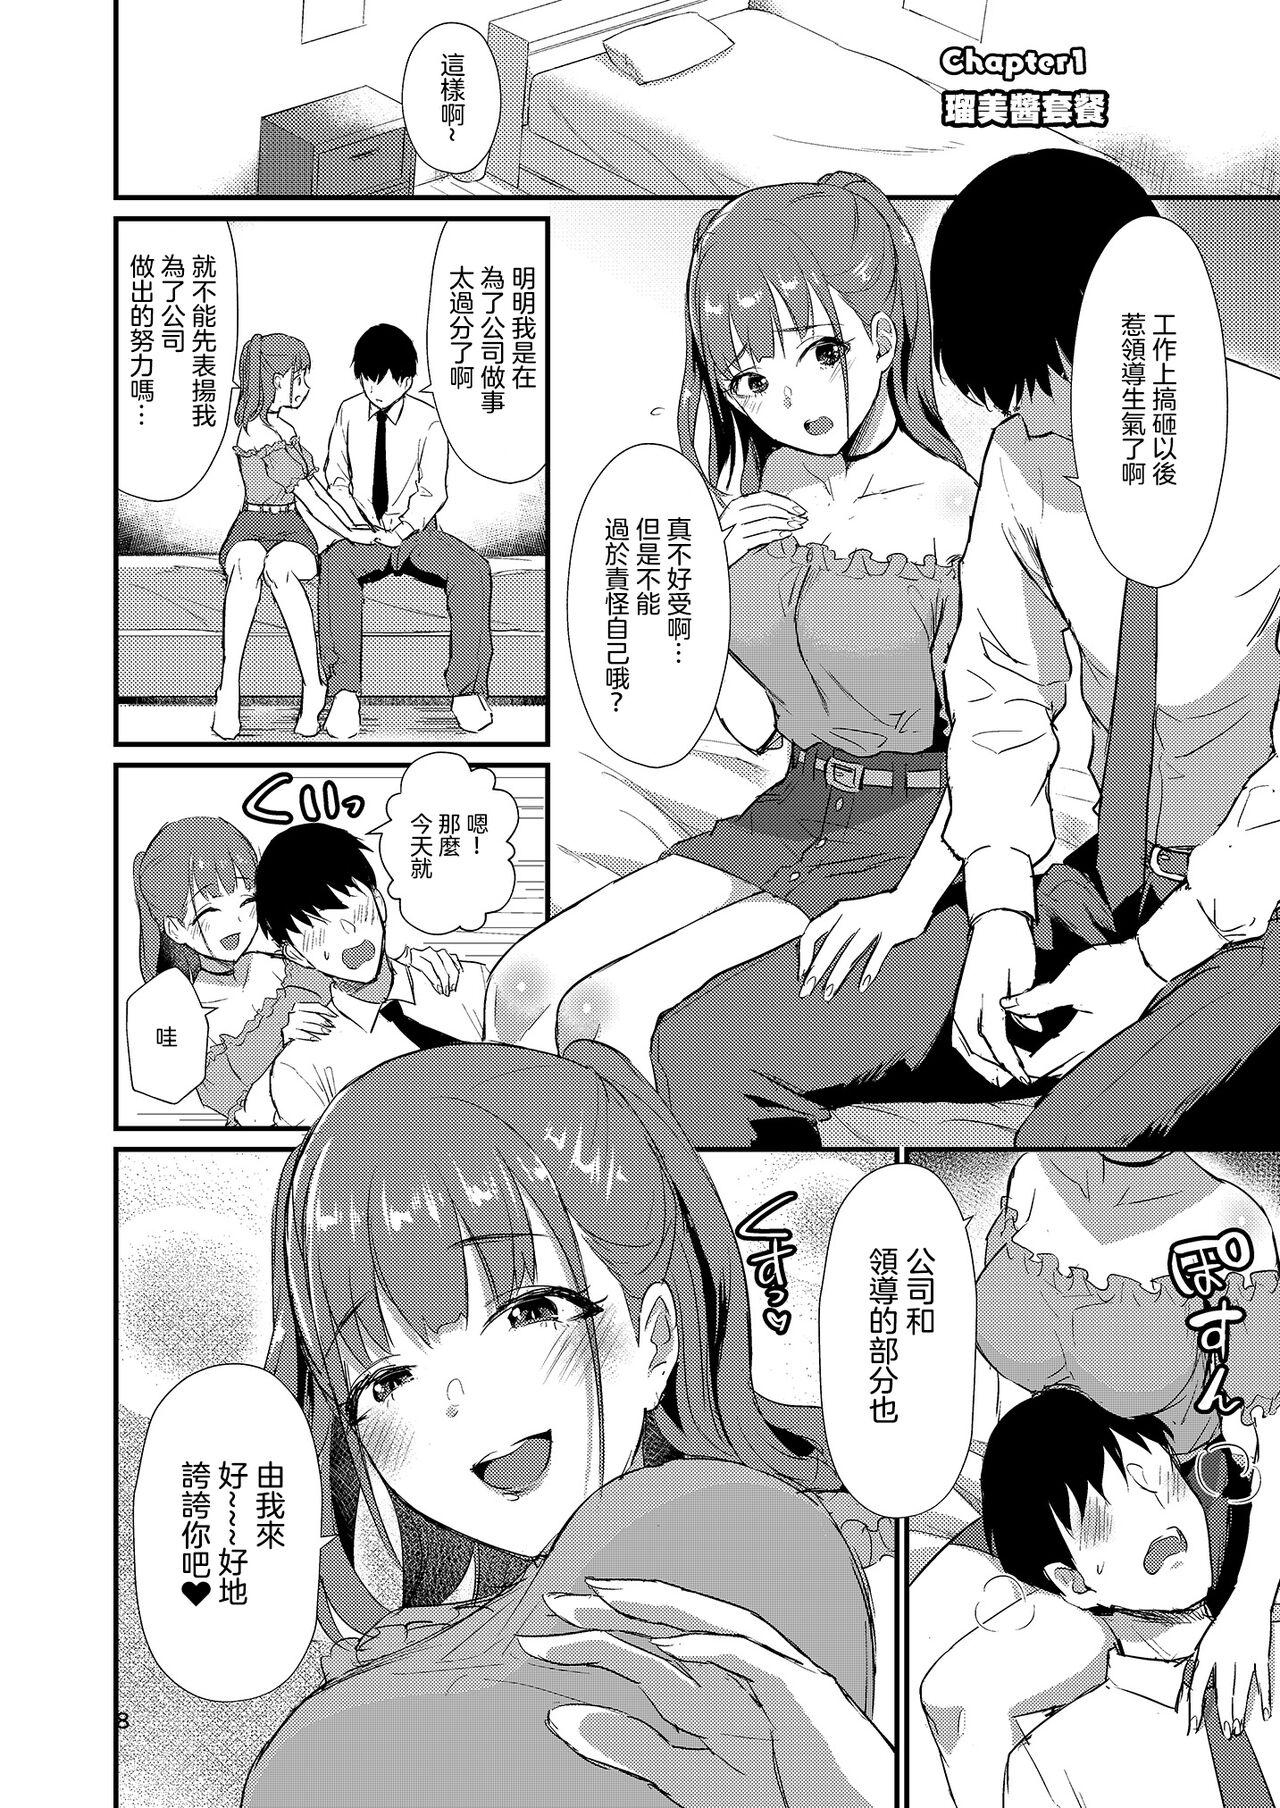 Piercings Homehome Home e Youkoso! - Welcome to Home Home Home! | 歡迎來到誇誇屋！ Sister - Page 9